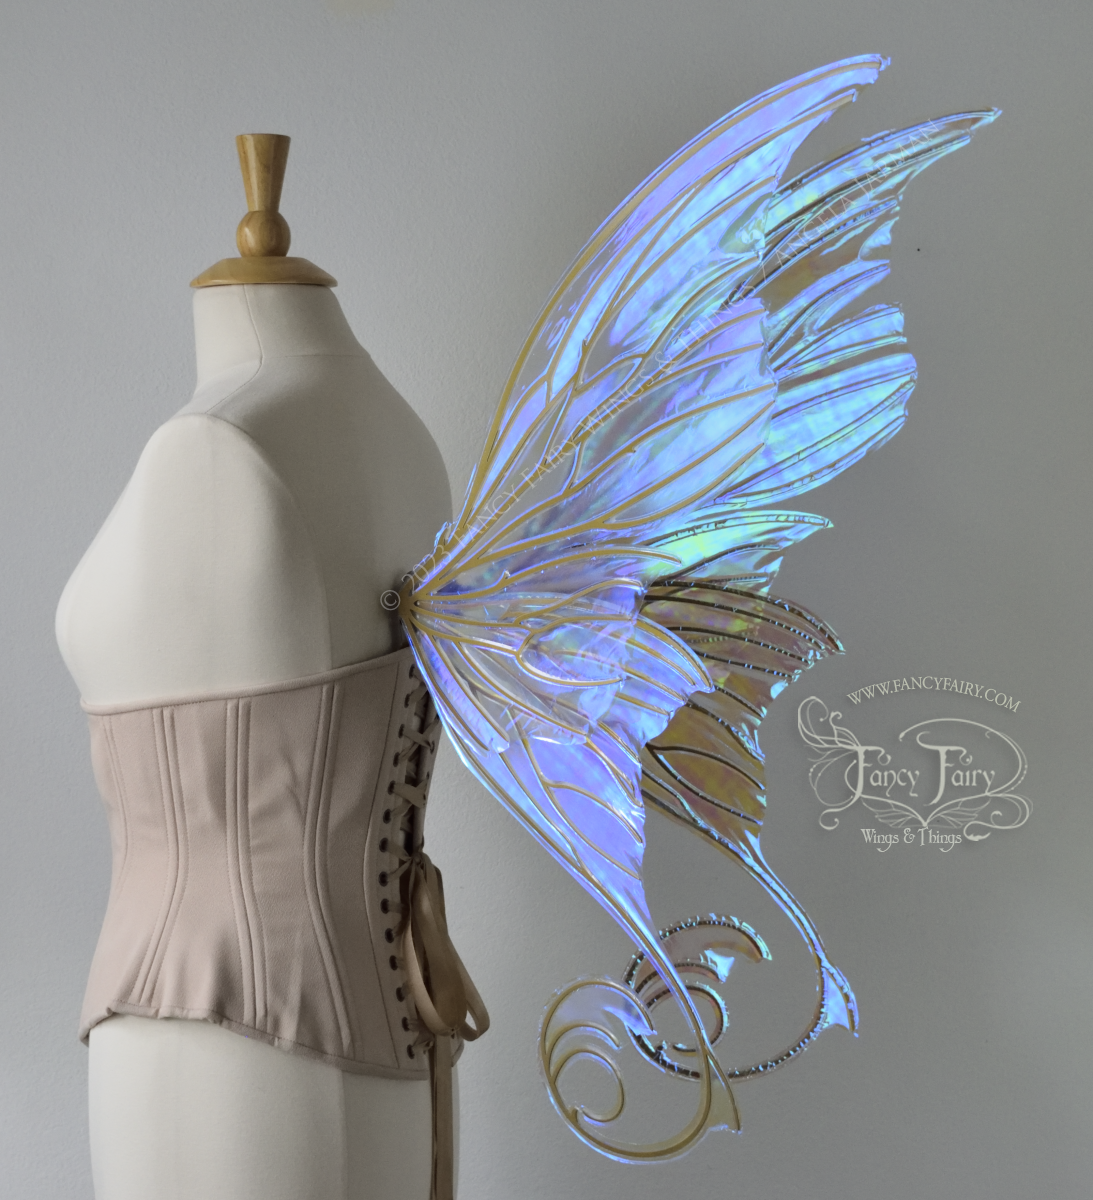 Back 3/4 view of a dress form wearing an underbust corset & large blue iridescent fairy wings with lots of intricate veins, some have 'thorns'. Upper panels curve slightly downwards along top edge with pointy tips, bottom panels have tails